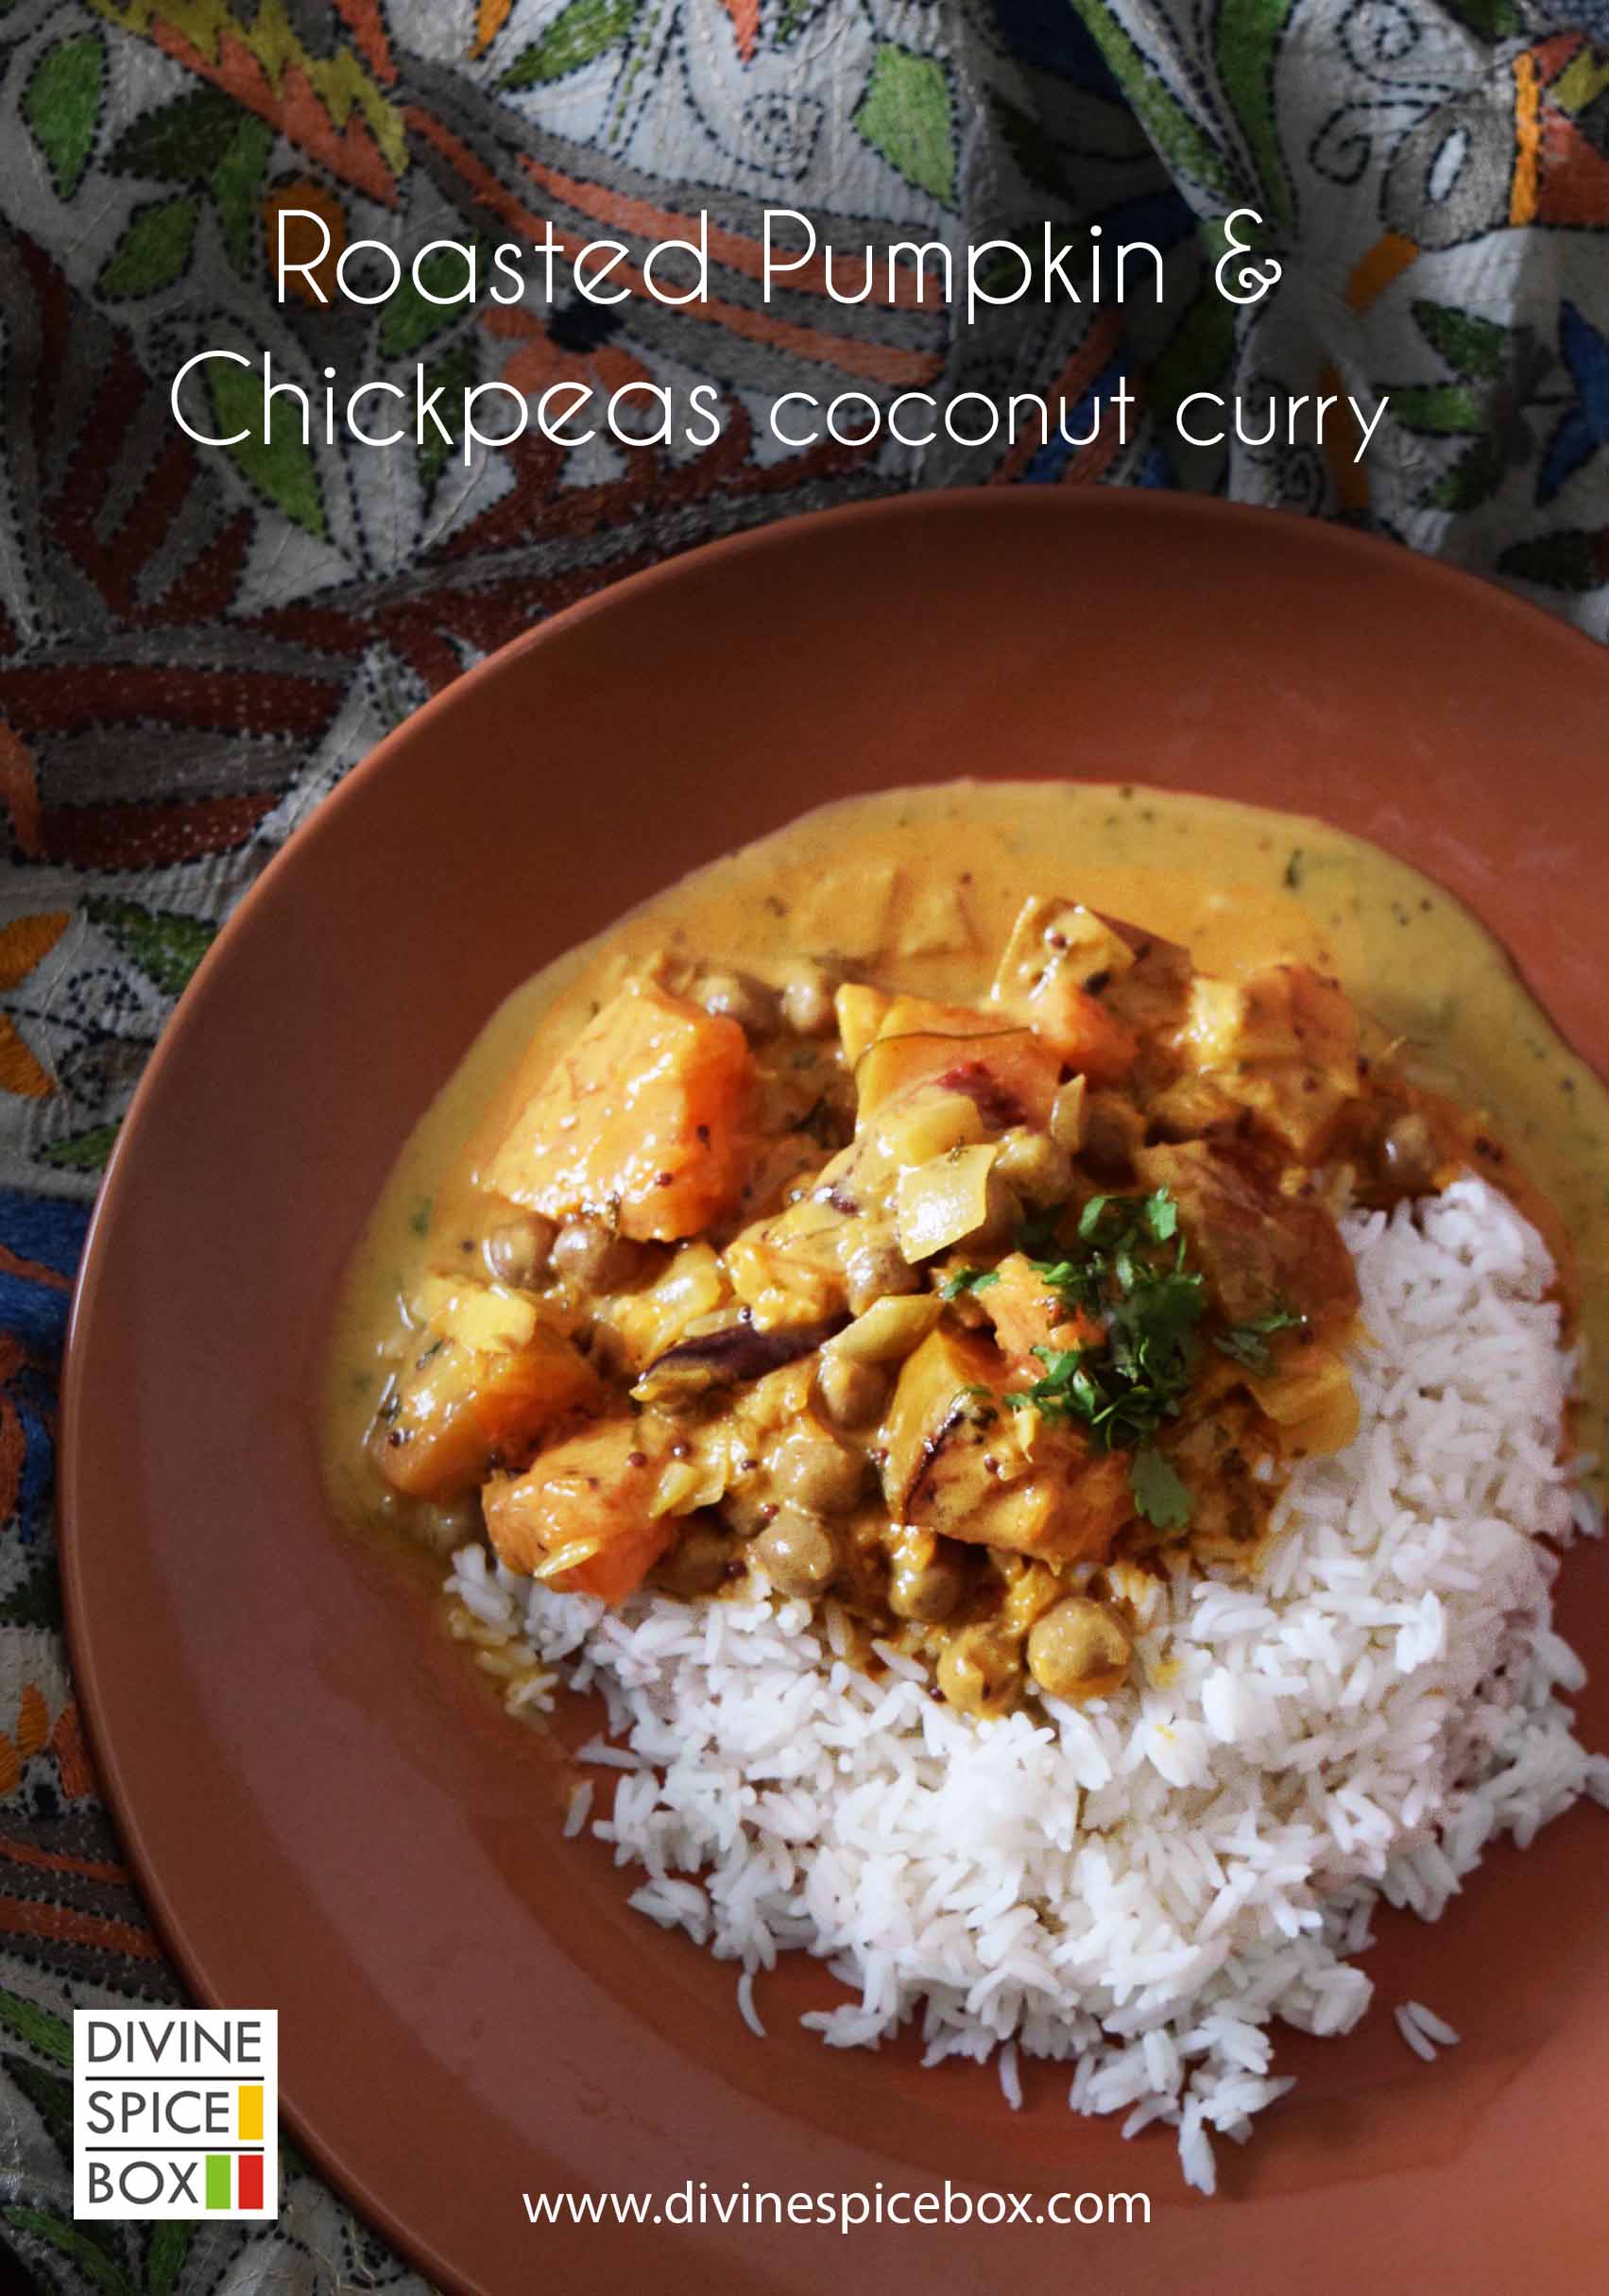 Roasted Pumpkin and Chickpea Coconut Curry